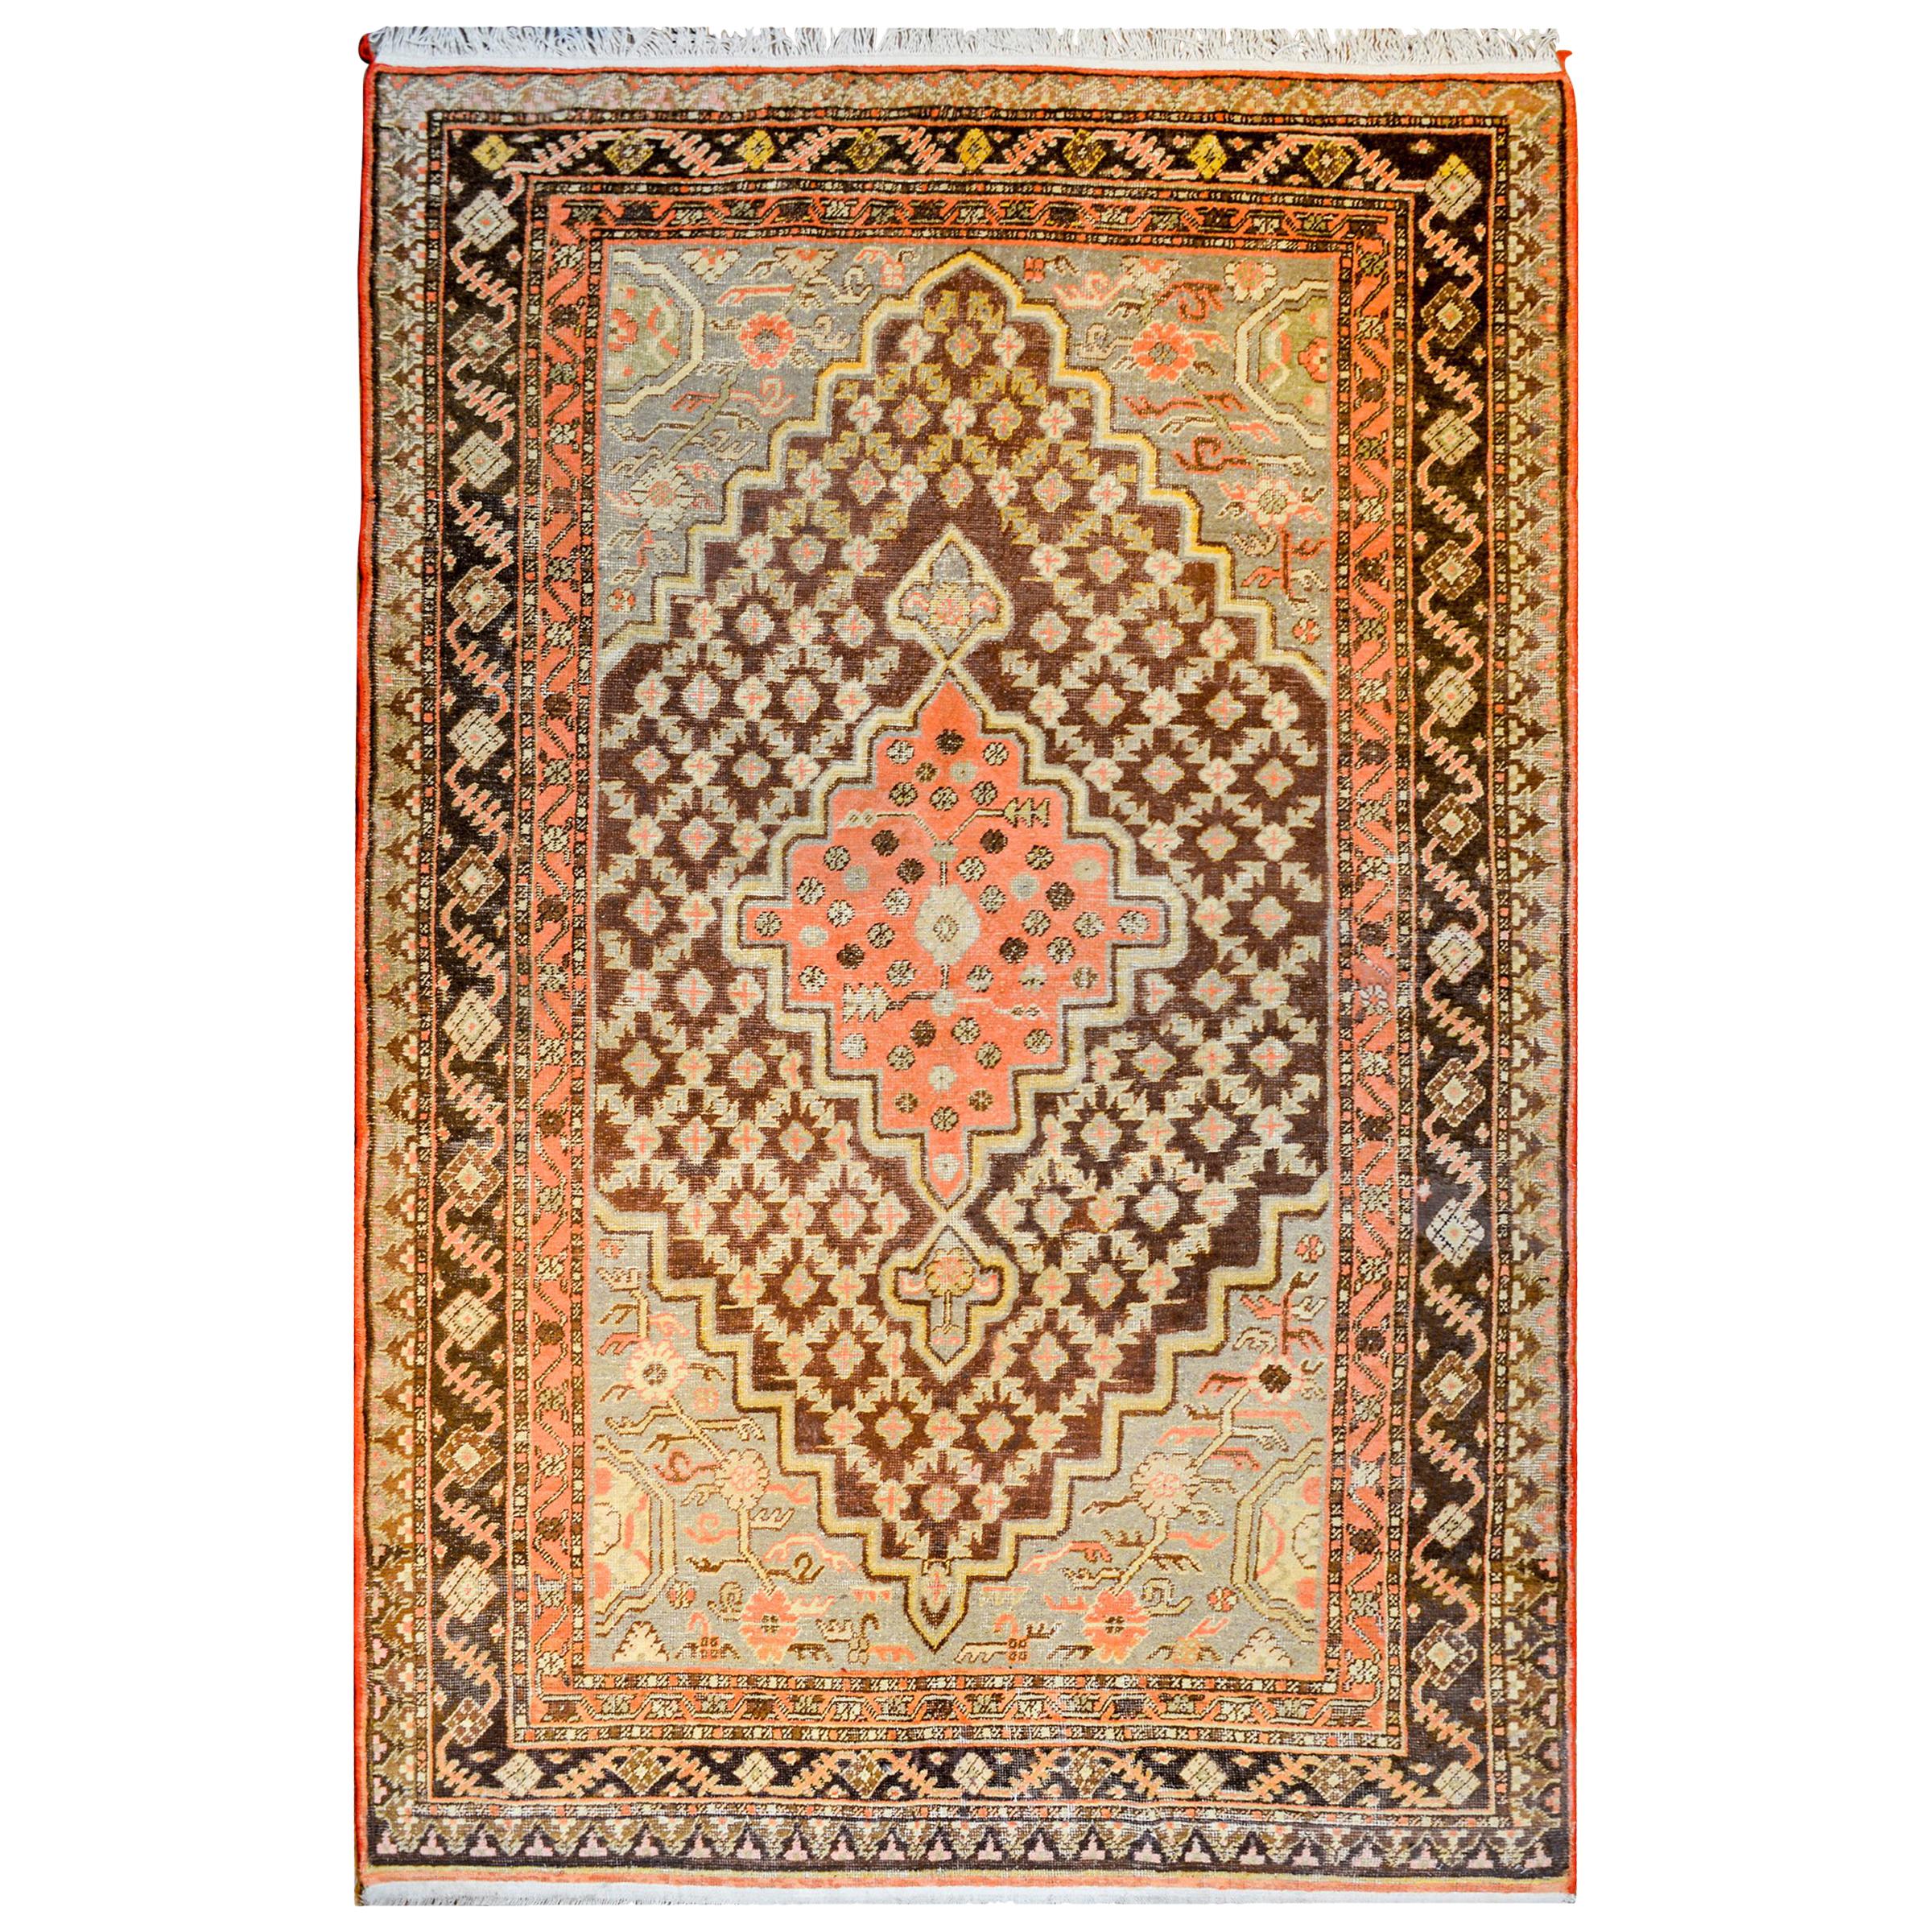 Early 20th Century Central Asian Samarghand Rug